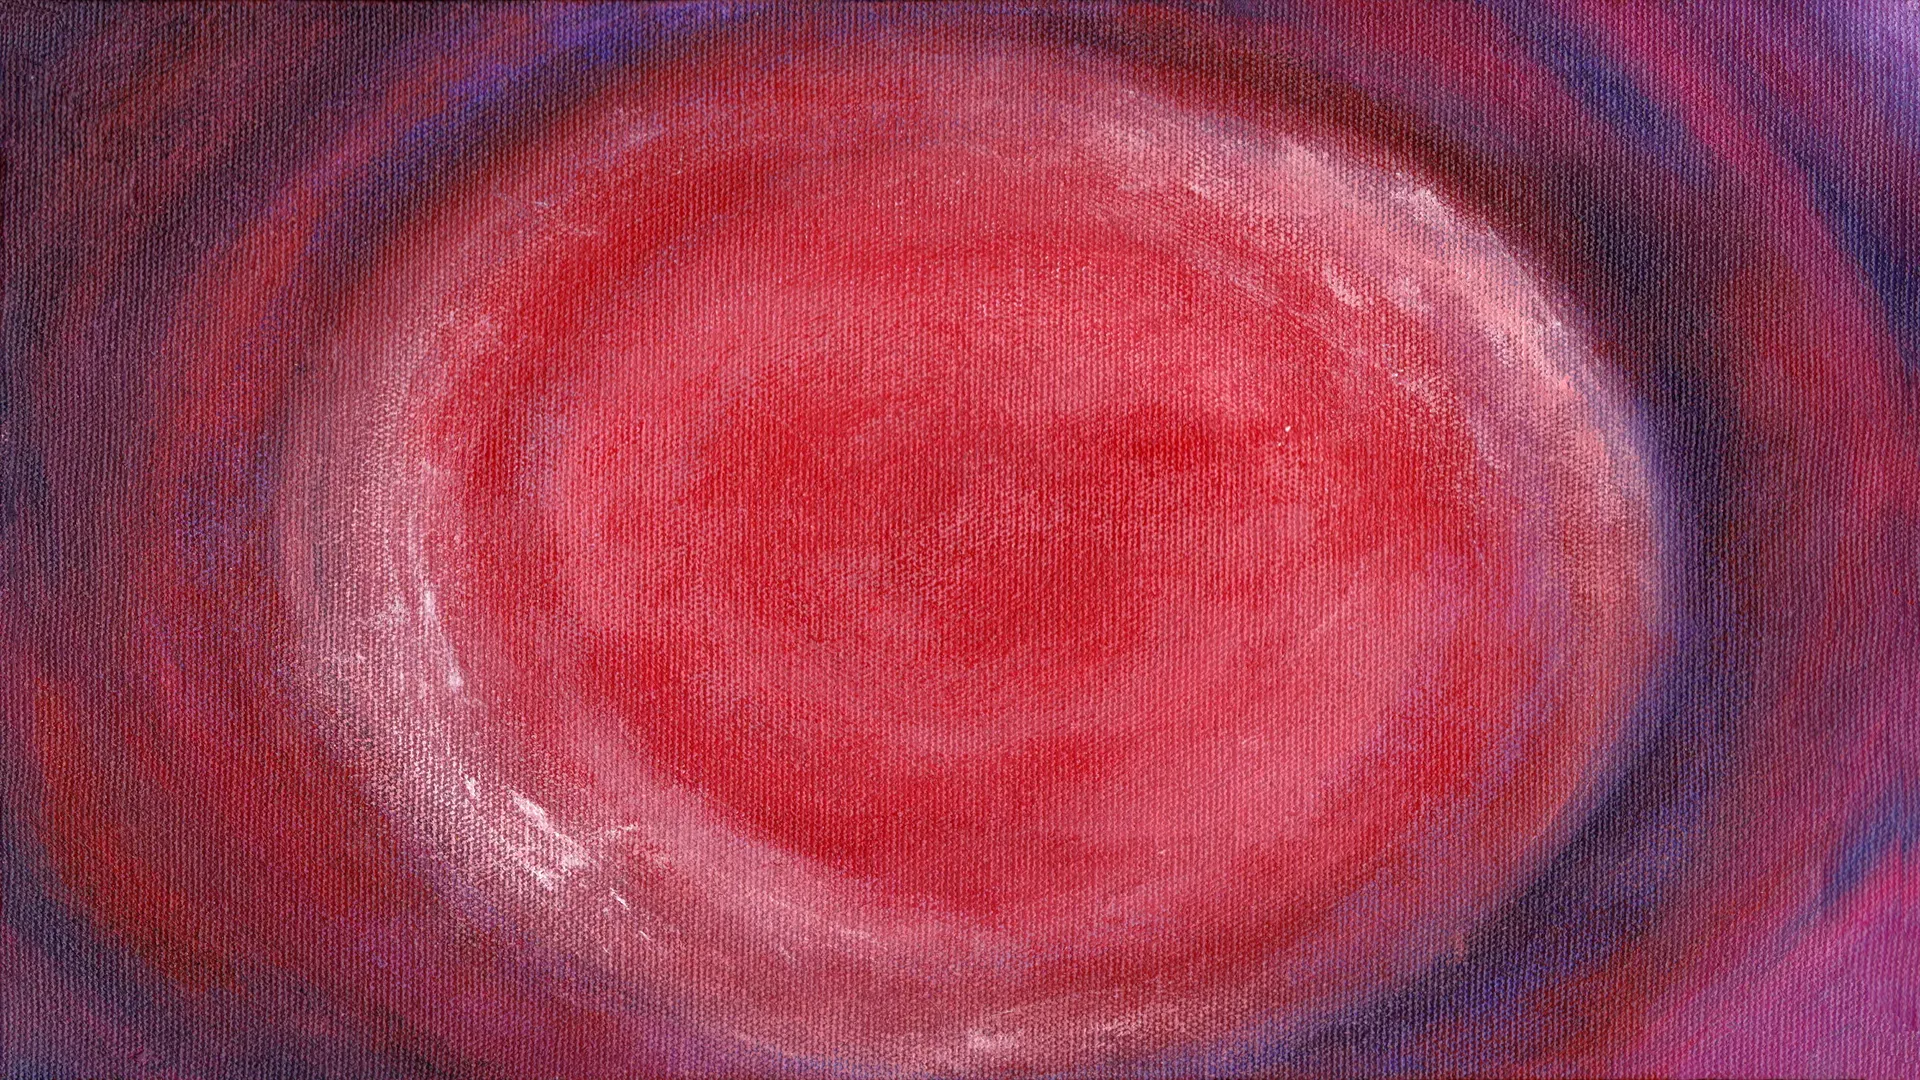 Acrylic abstract painting of a Lunar Blood Moon Eclipse shows a red sphere in center surrounded by circular red and blue tones